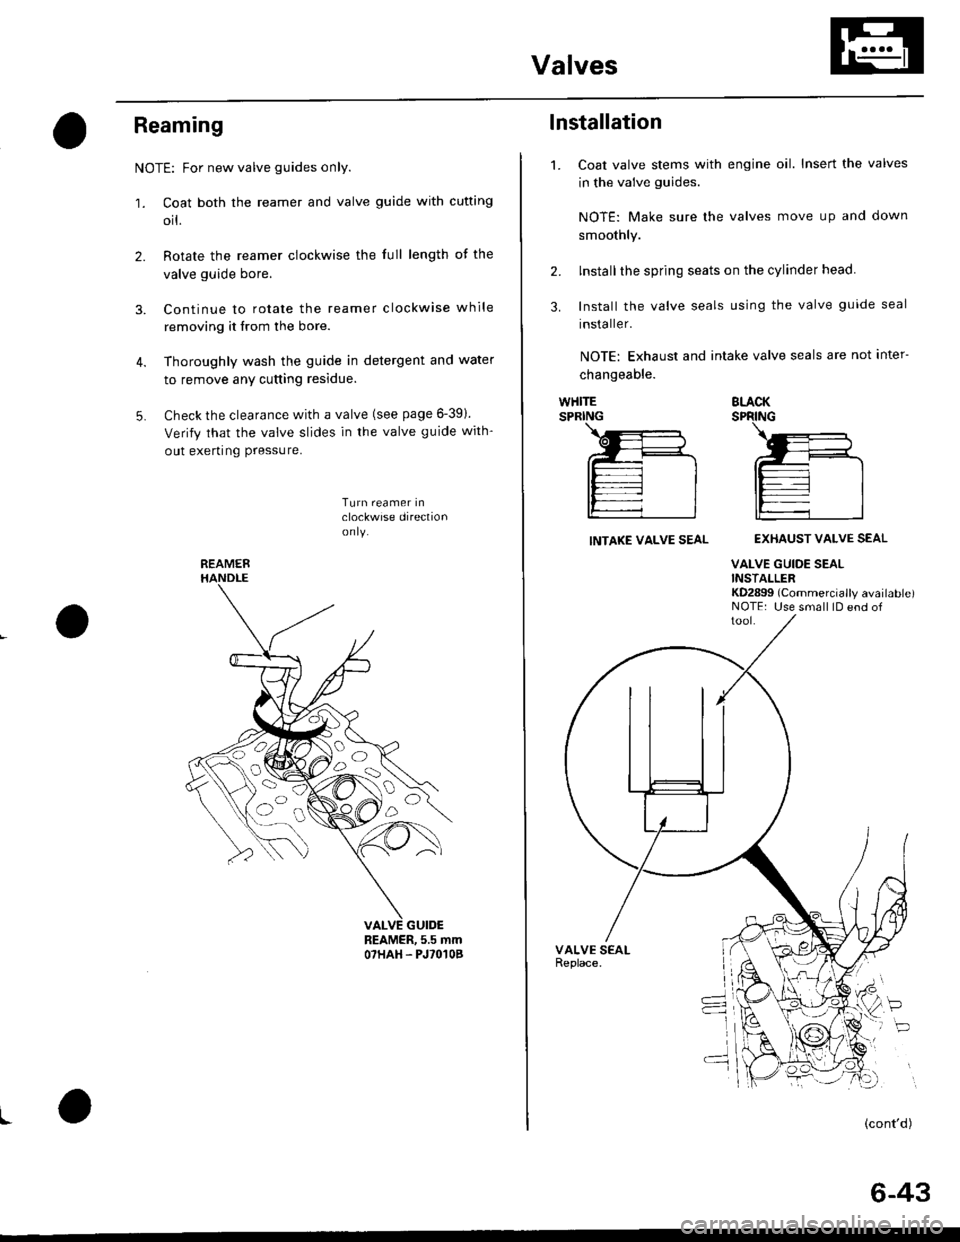 HONDA CIVIC 1996 6.G Owners Manual Valves
Reaming
NOTE: For new valve guides only.
1. Coat both the reamer and valve guide with cufting
orl.
2. Rotate the reamer clockwise the full length of the
valve guide bore.
3. Continue to rotate 